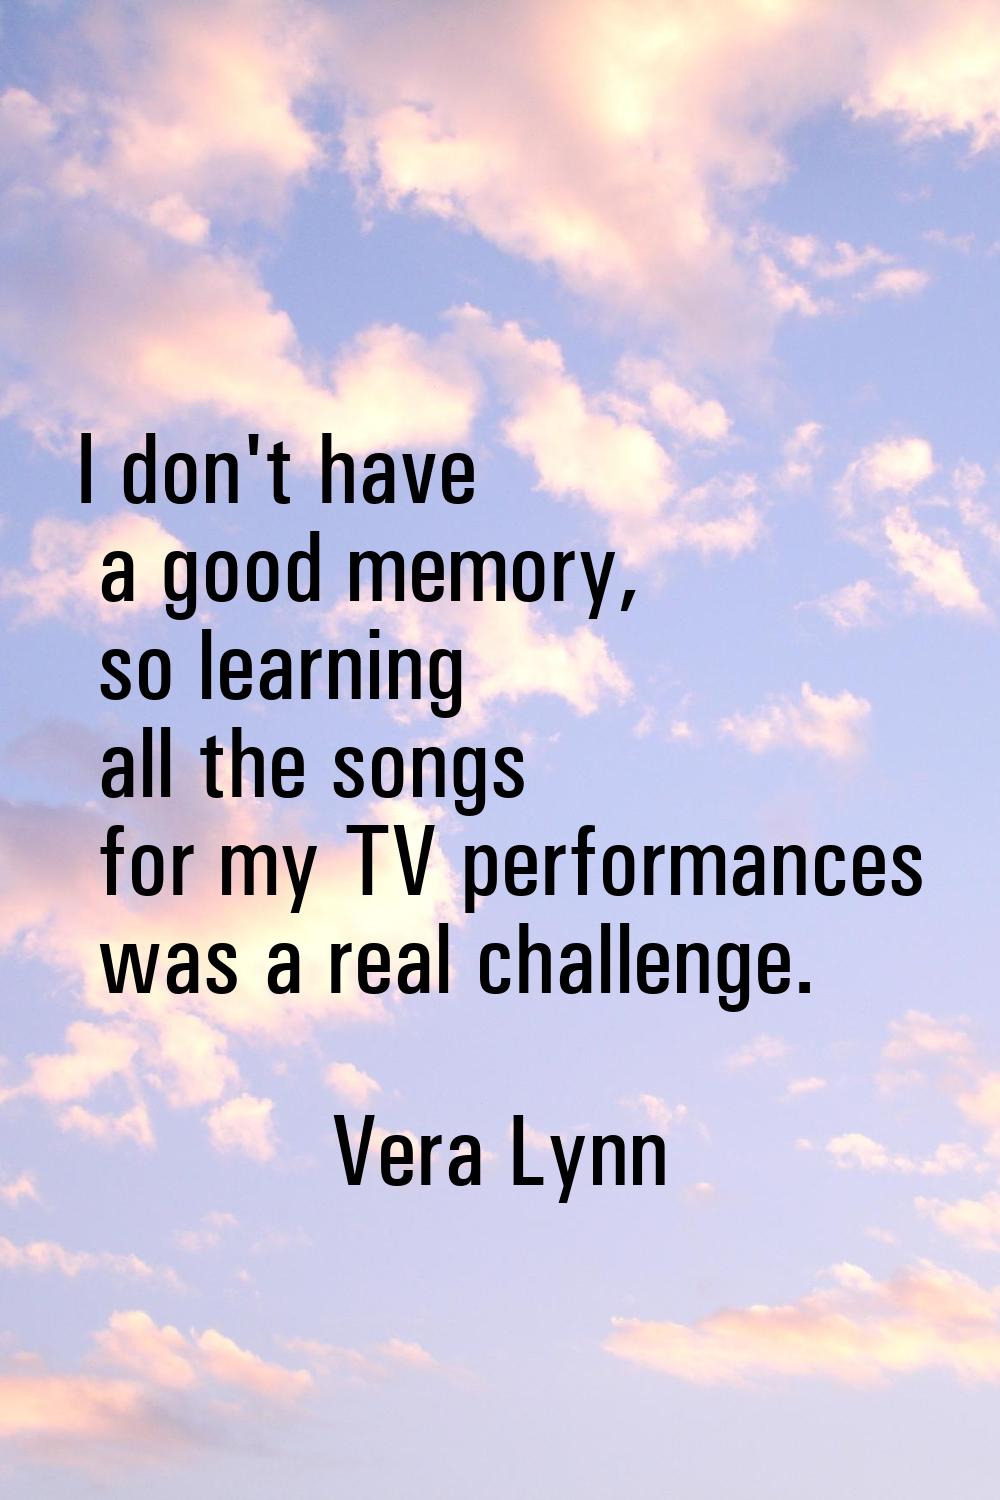 I don't have a good memory, so learning all the songs for my TV performances was a real challenge.